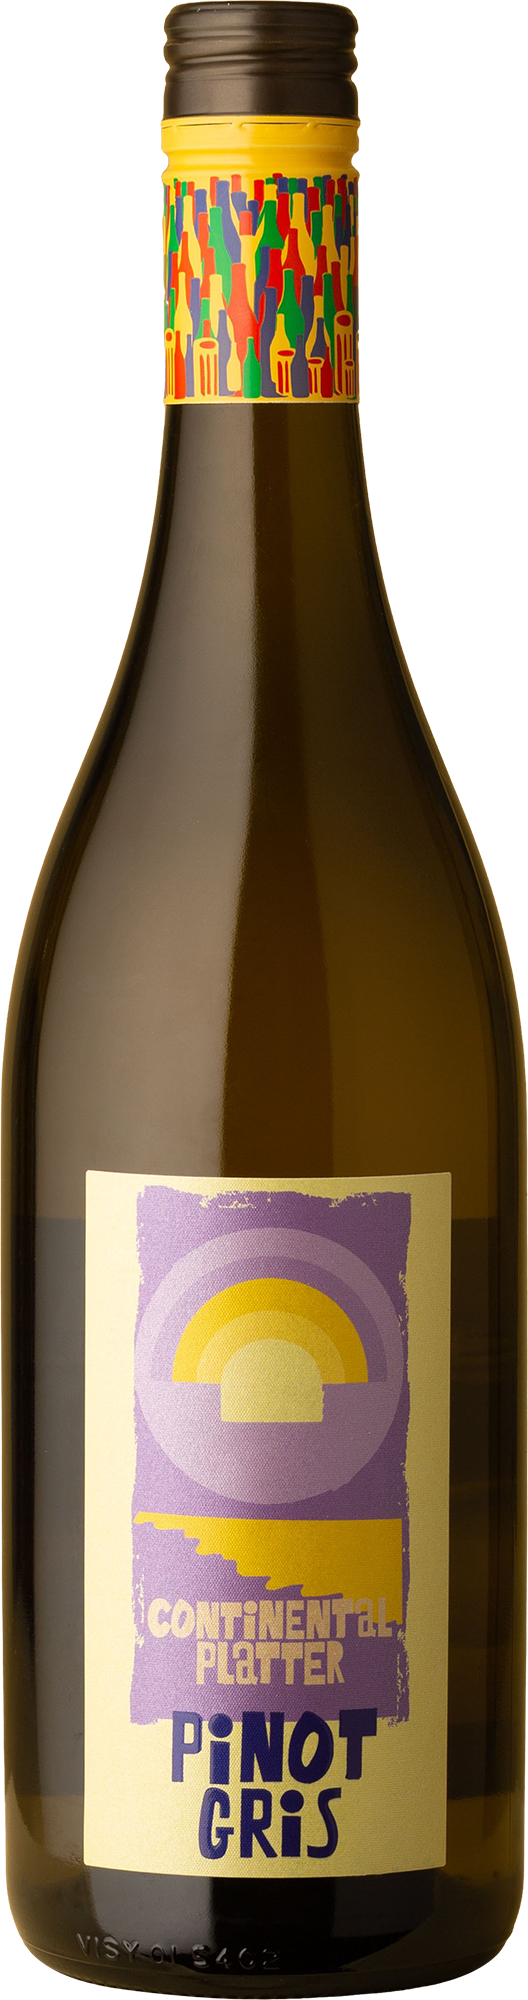 Continental Platter - Pinot Gris 2021 White Wine